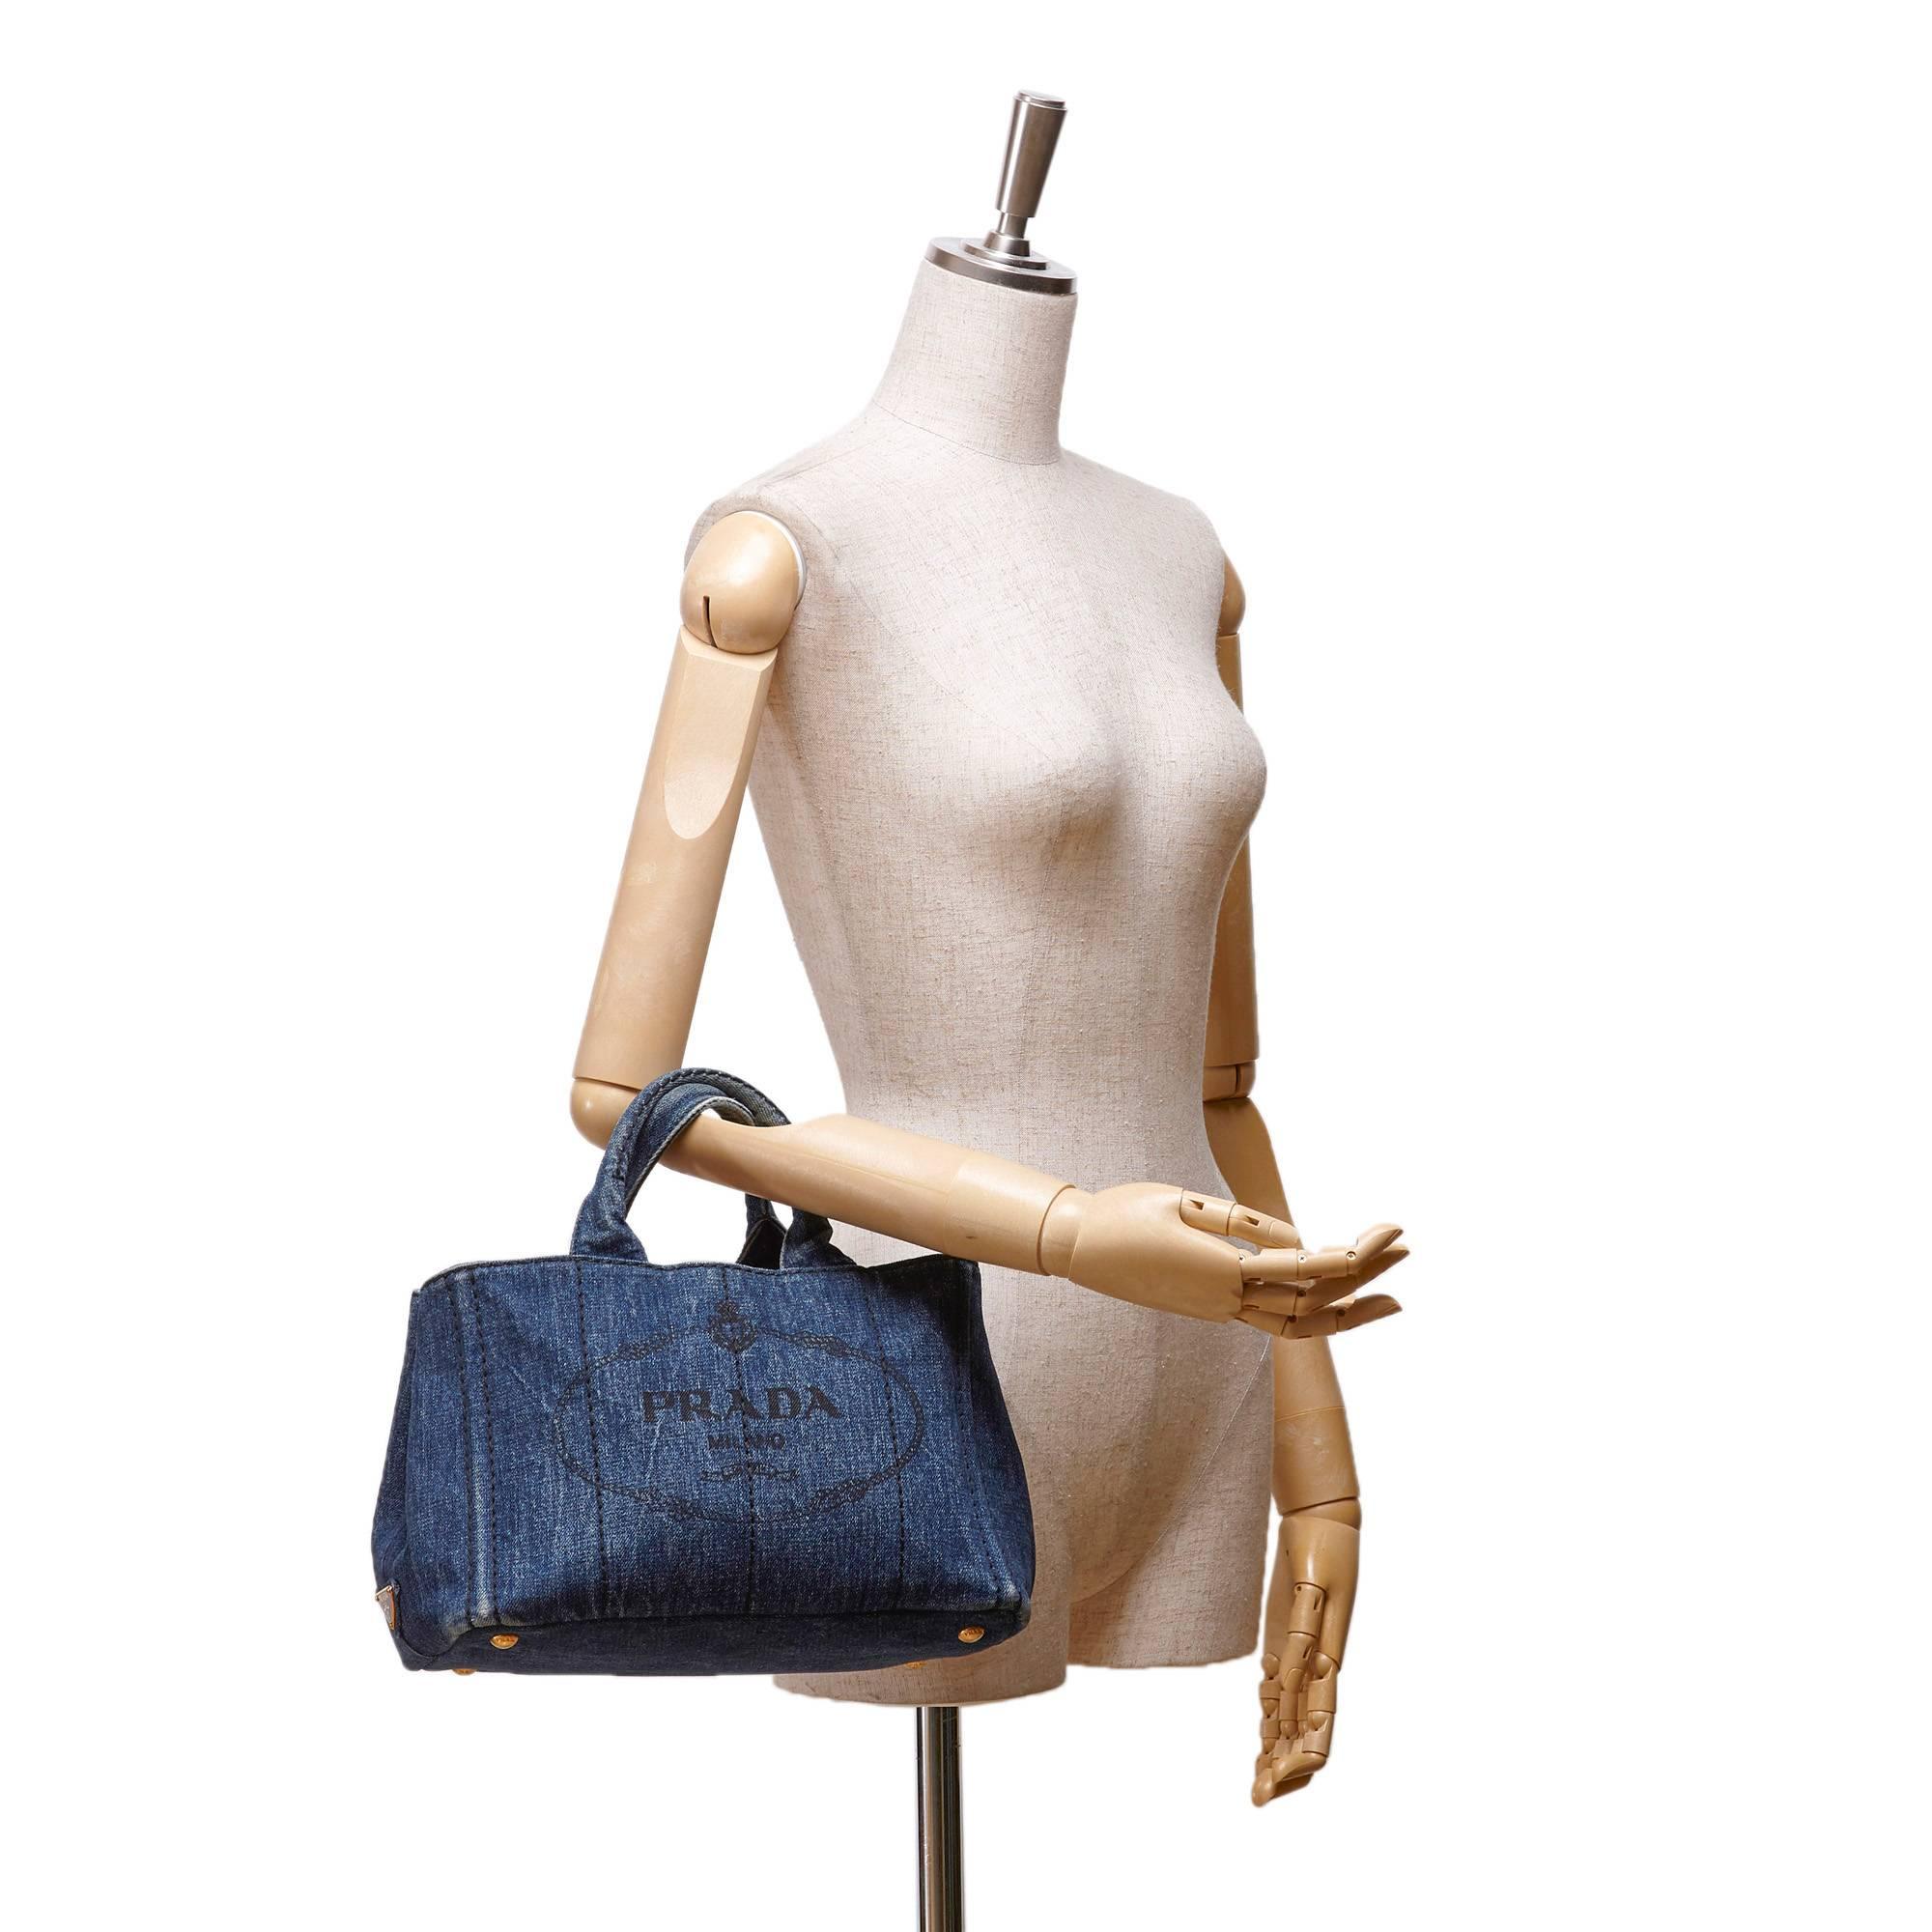 - This Prada tote bag features a denim body, rolled handles, an open top, and interior zip pockets. A chic casual bag for summer get away! 

- Made in Italy. 

- Size: 29cm x 20cm x 11cm. Shoulder Drop: 15cm. Hand Drop: 11cm. 

- Condition: Edge is